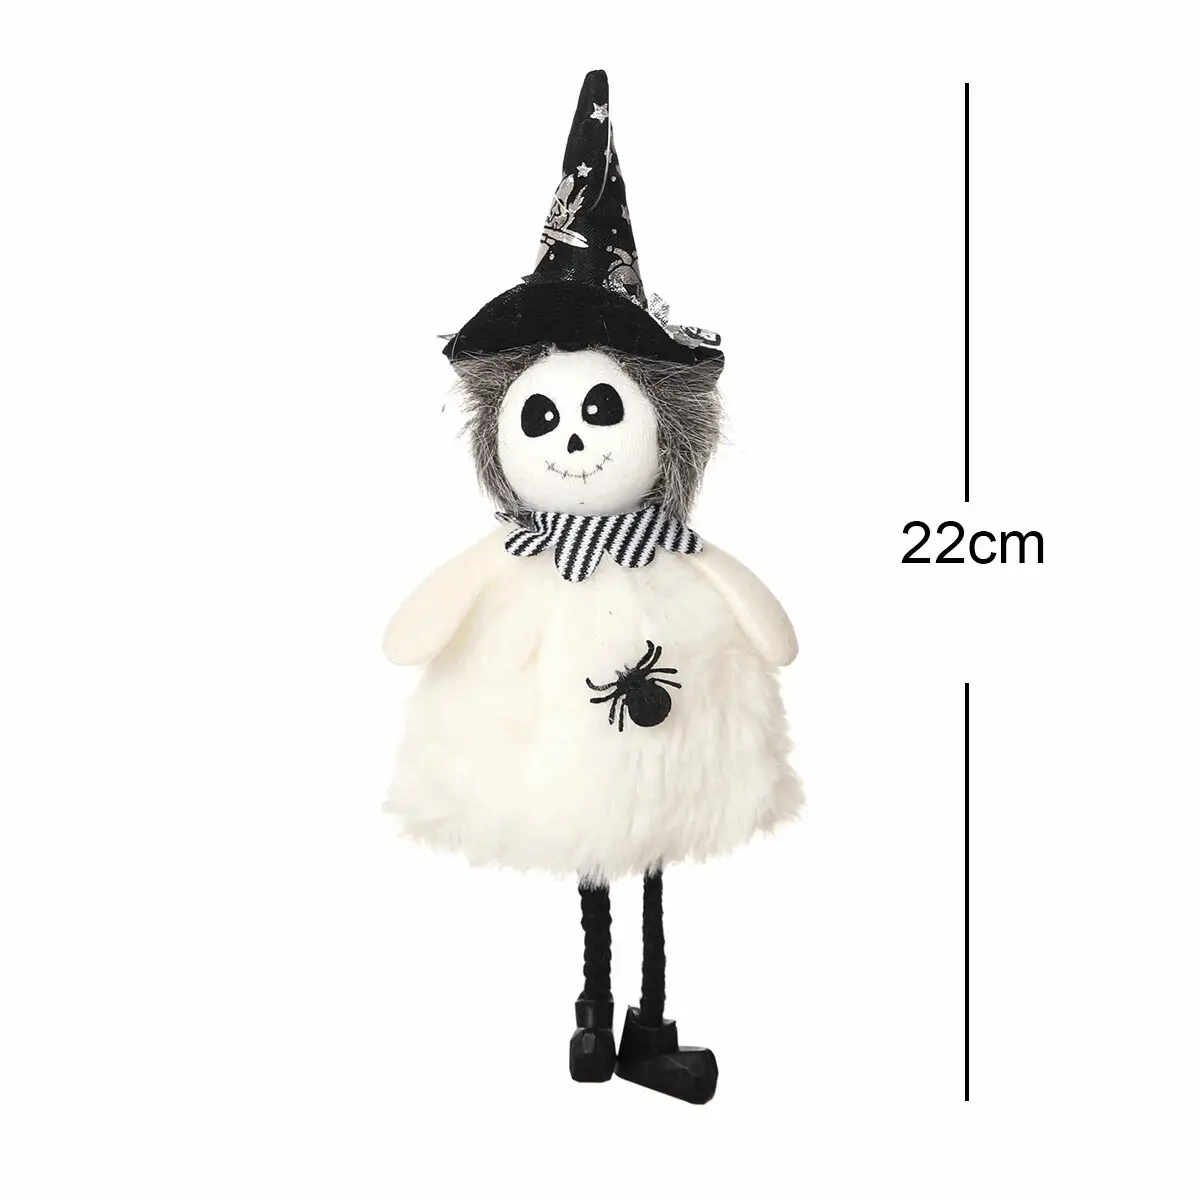 a stuffed animal wearing a witches hat